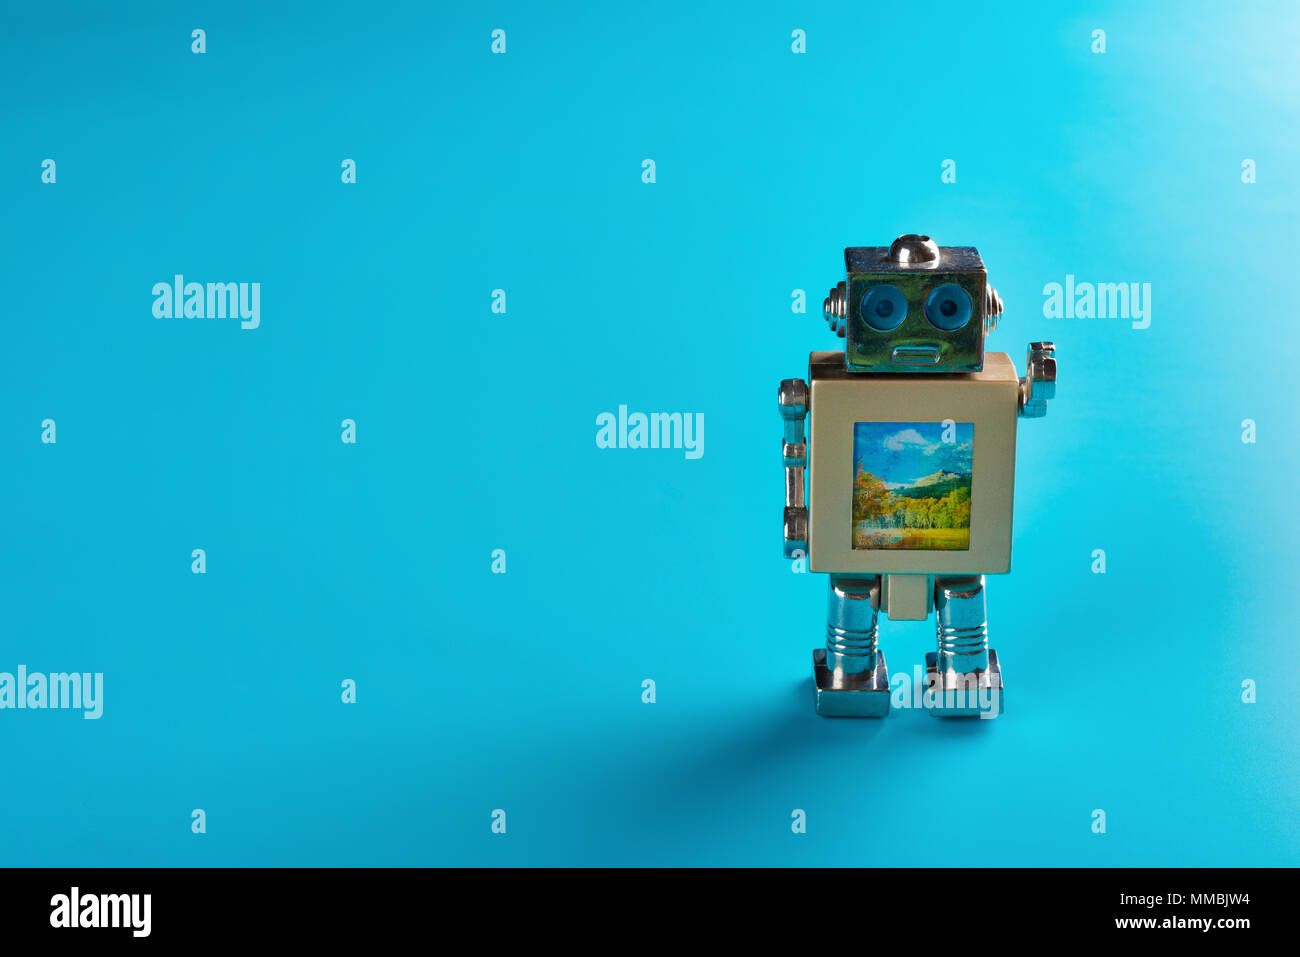 metal toy robot on a blue background Stock Photo